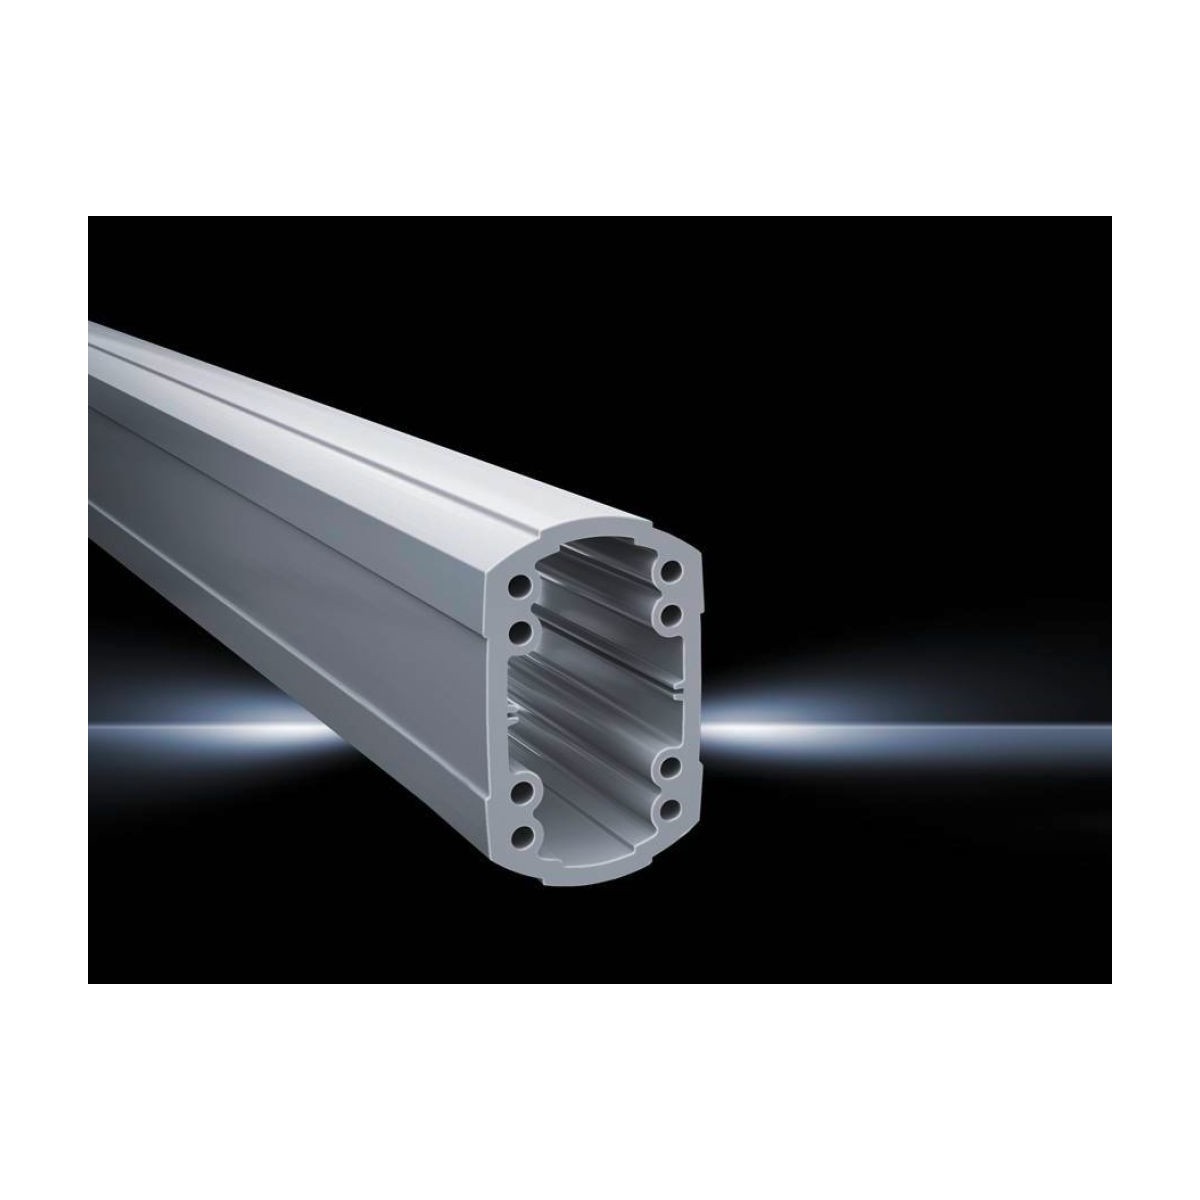 Rittal CP 6212.200 - Straight cable tray - 2 m - Aluminum - Aluminum